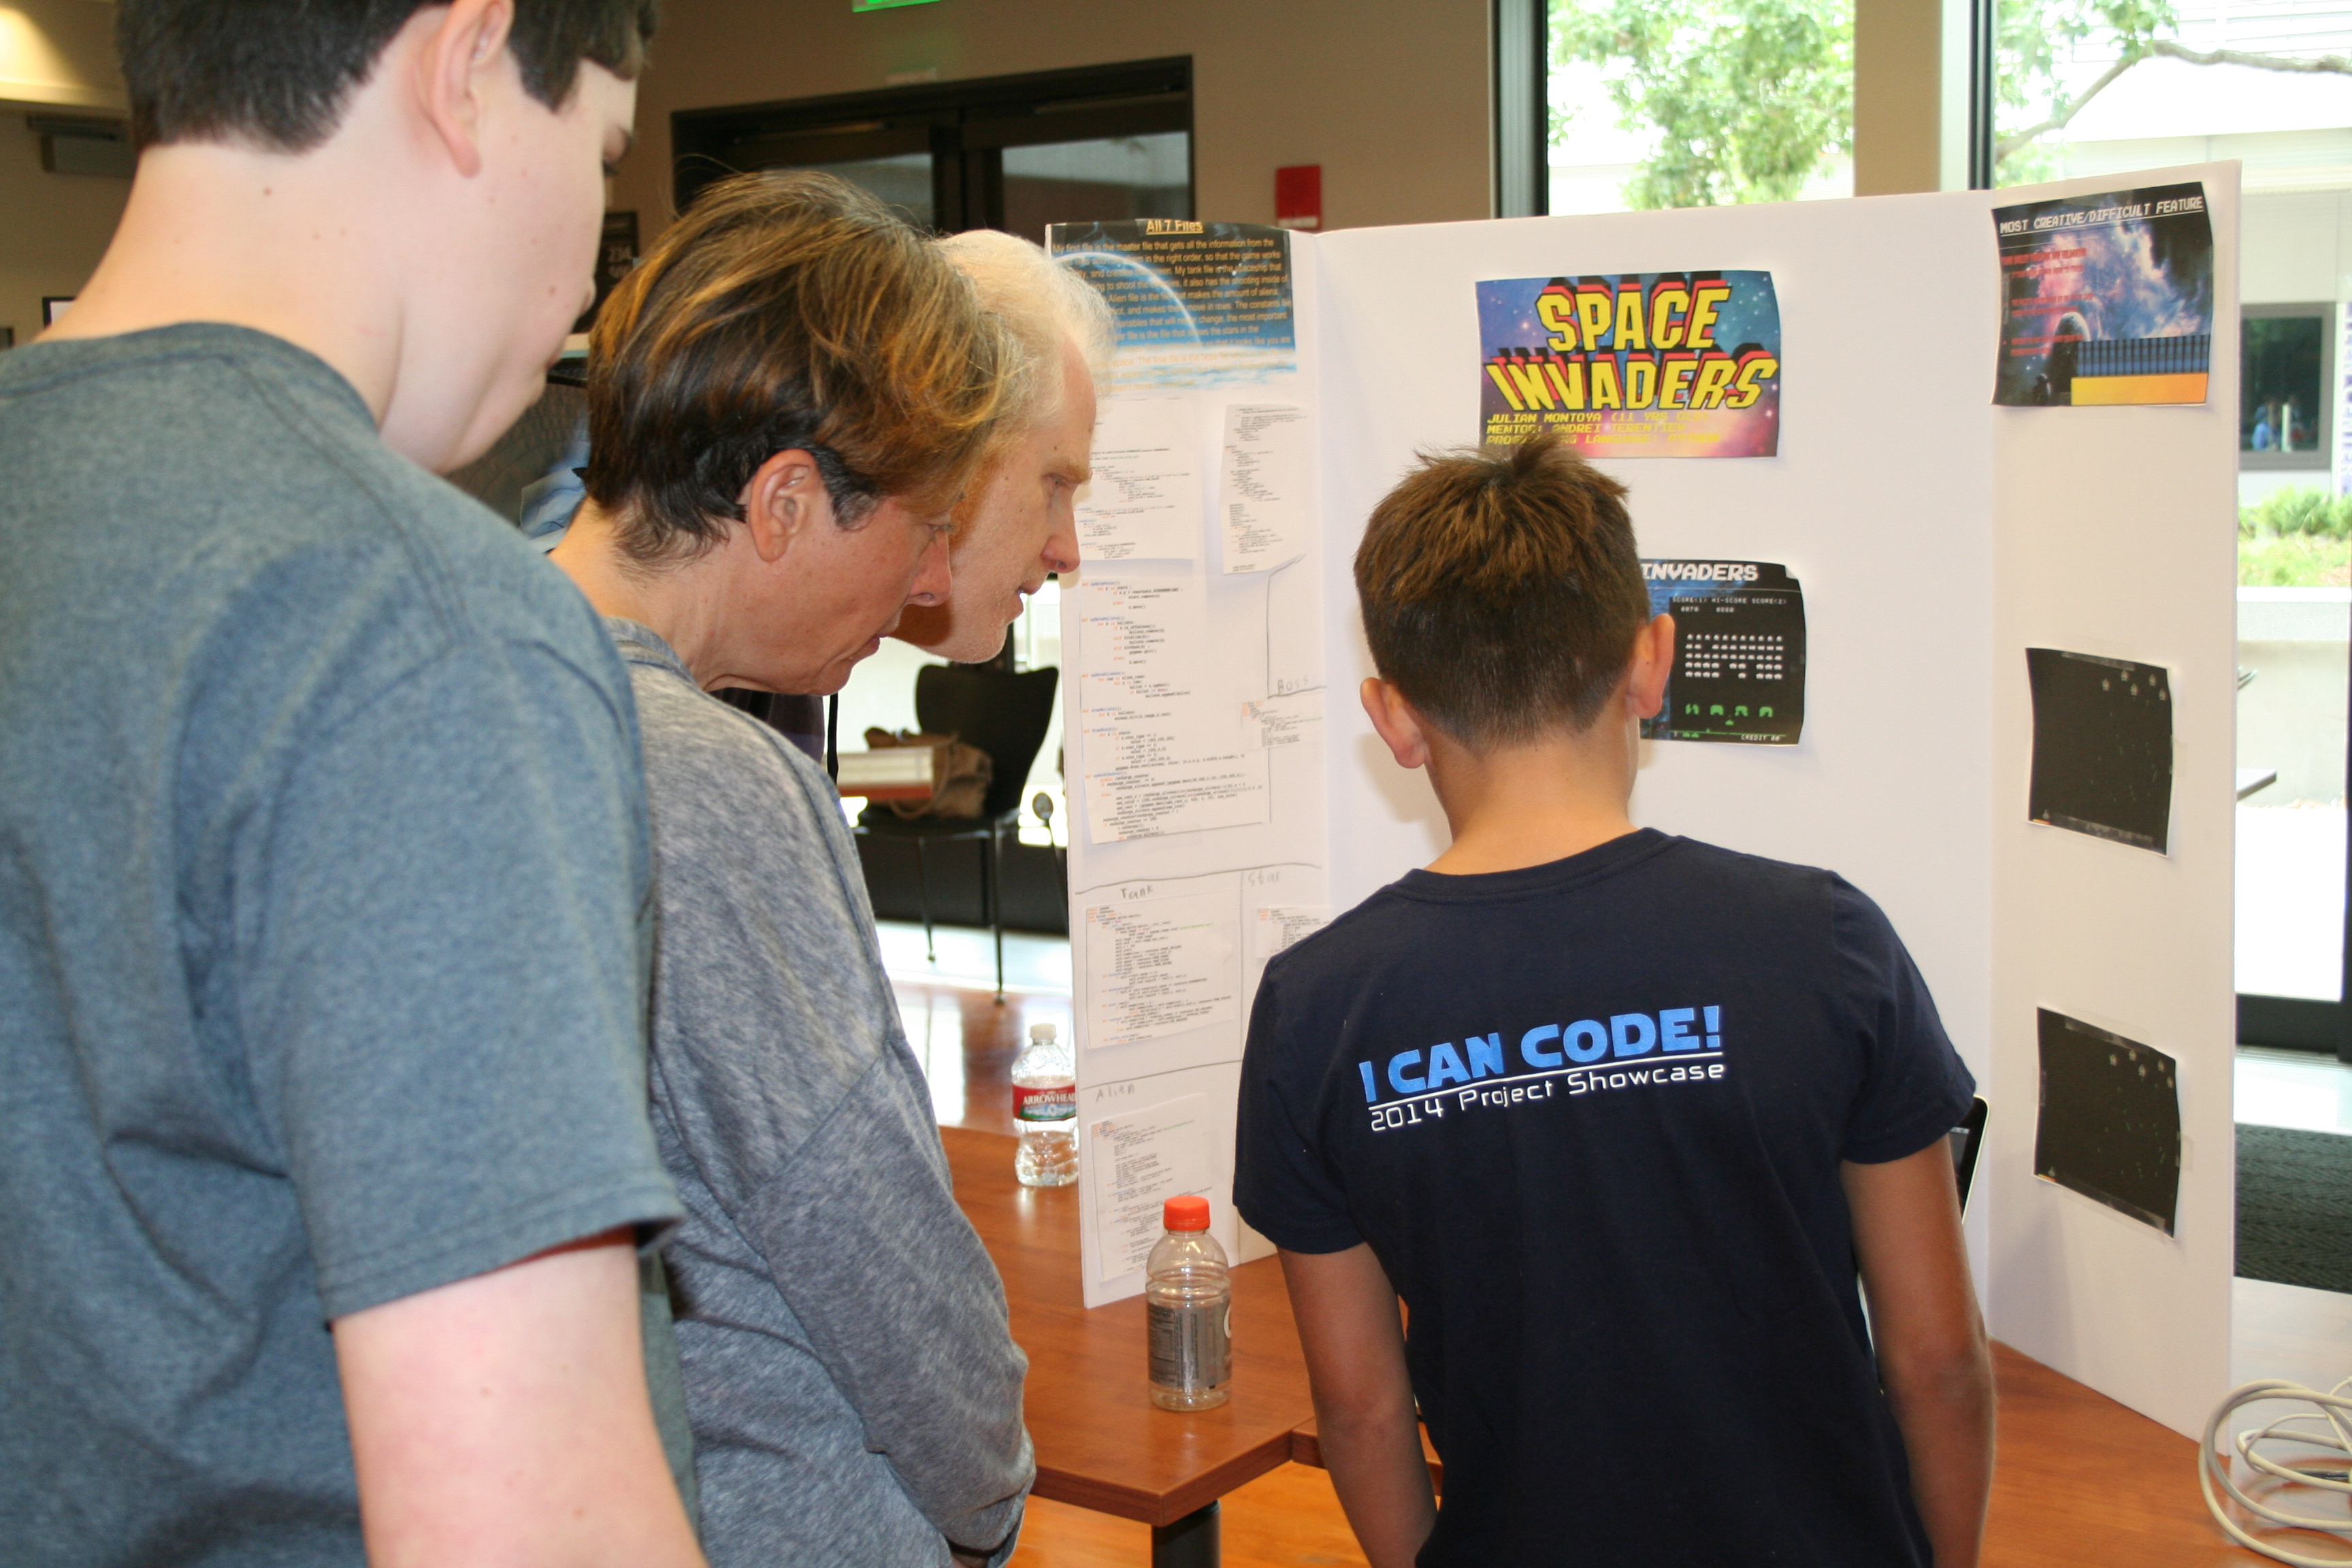 Check Out the Impressive Projects Shared by Kids at Our 2015 Student Showcase